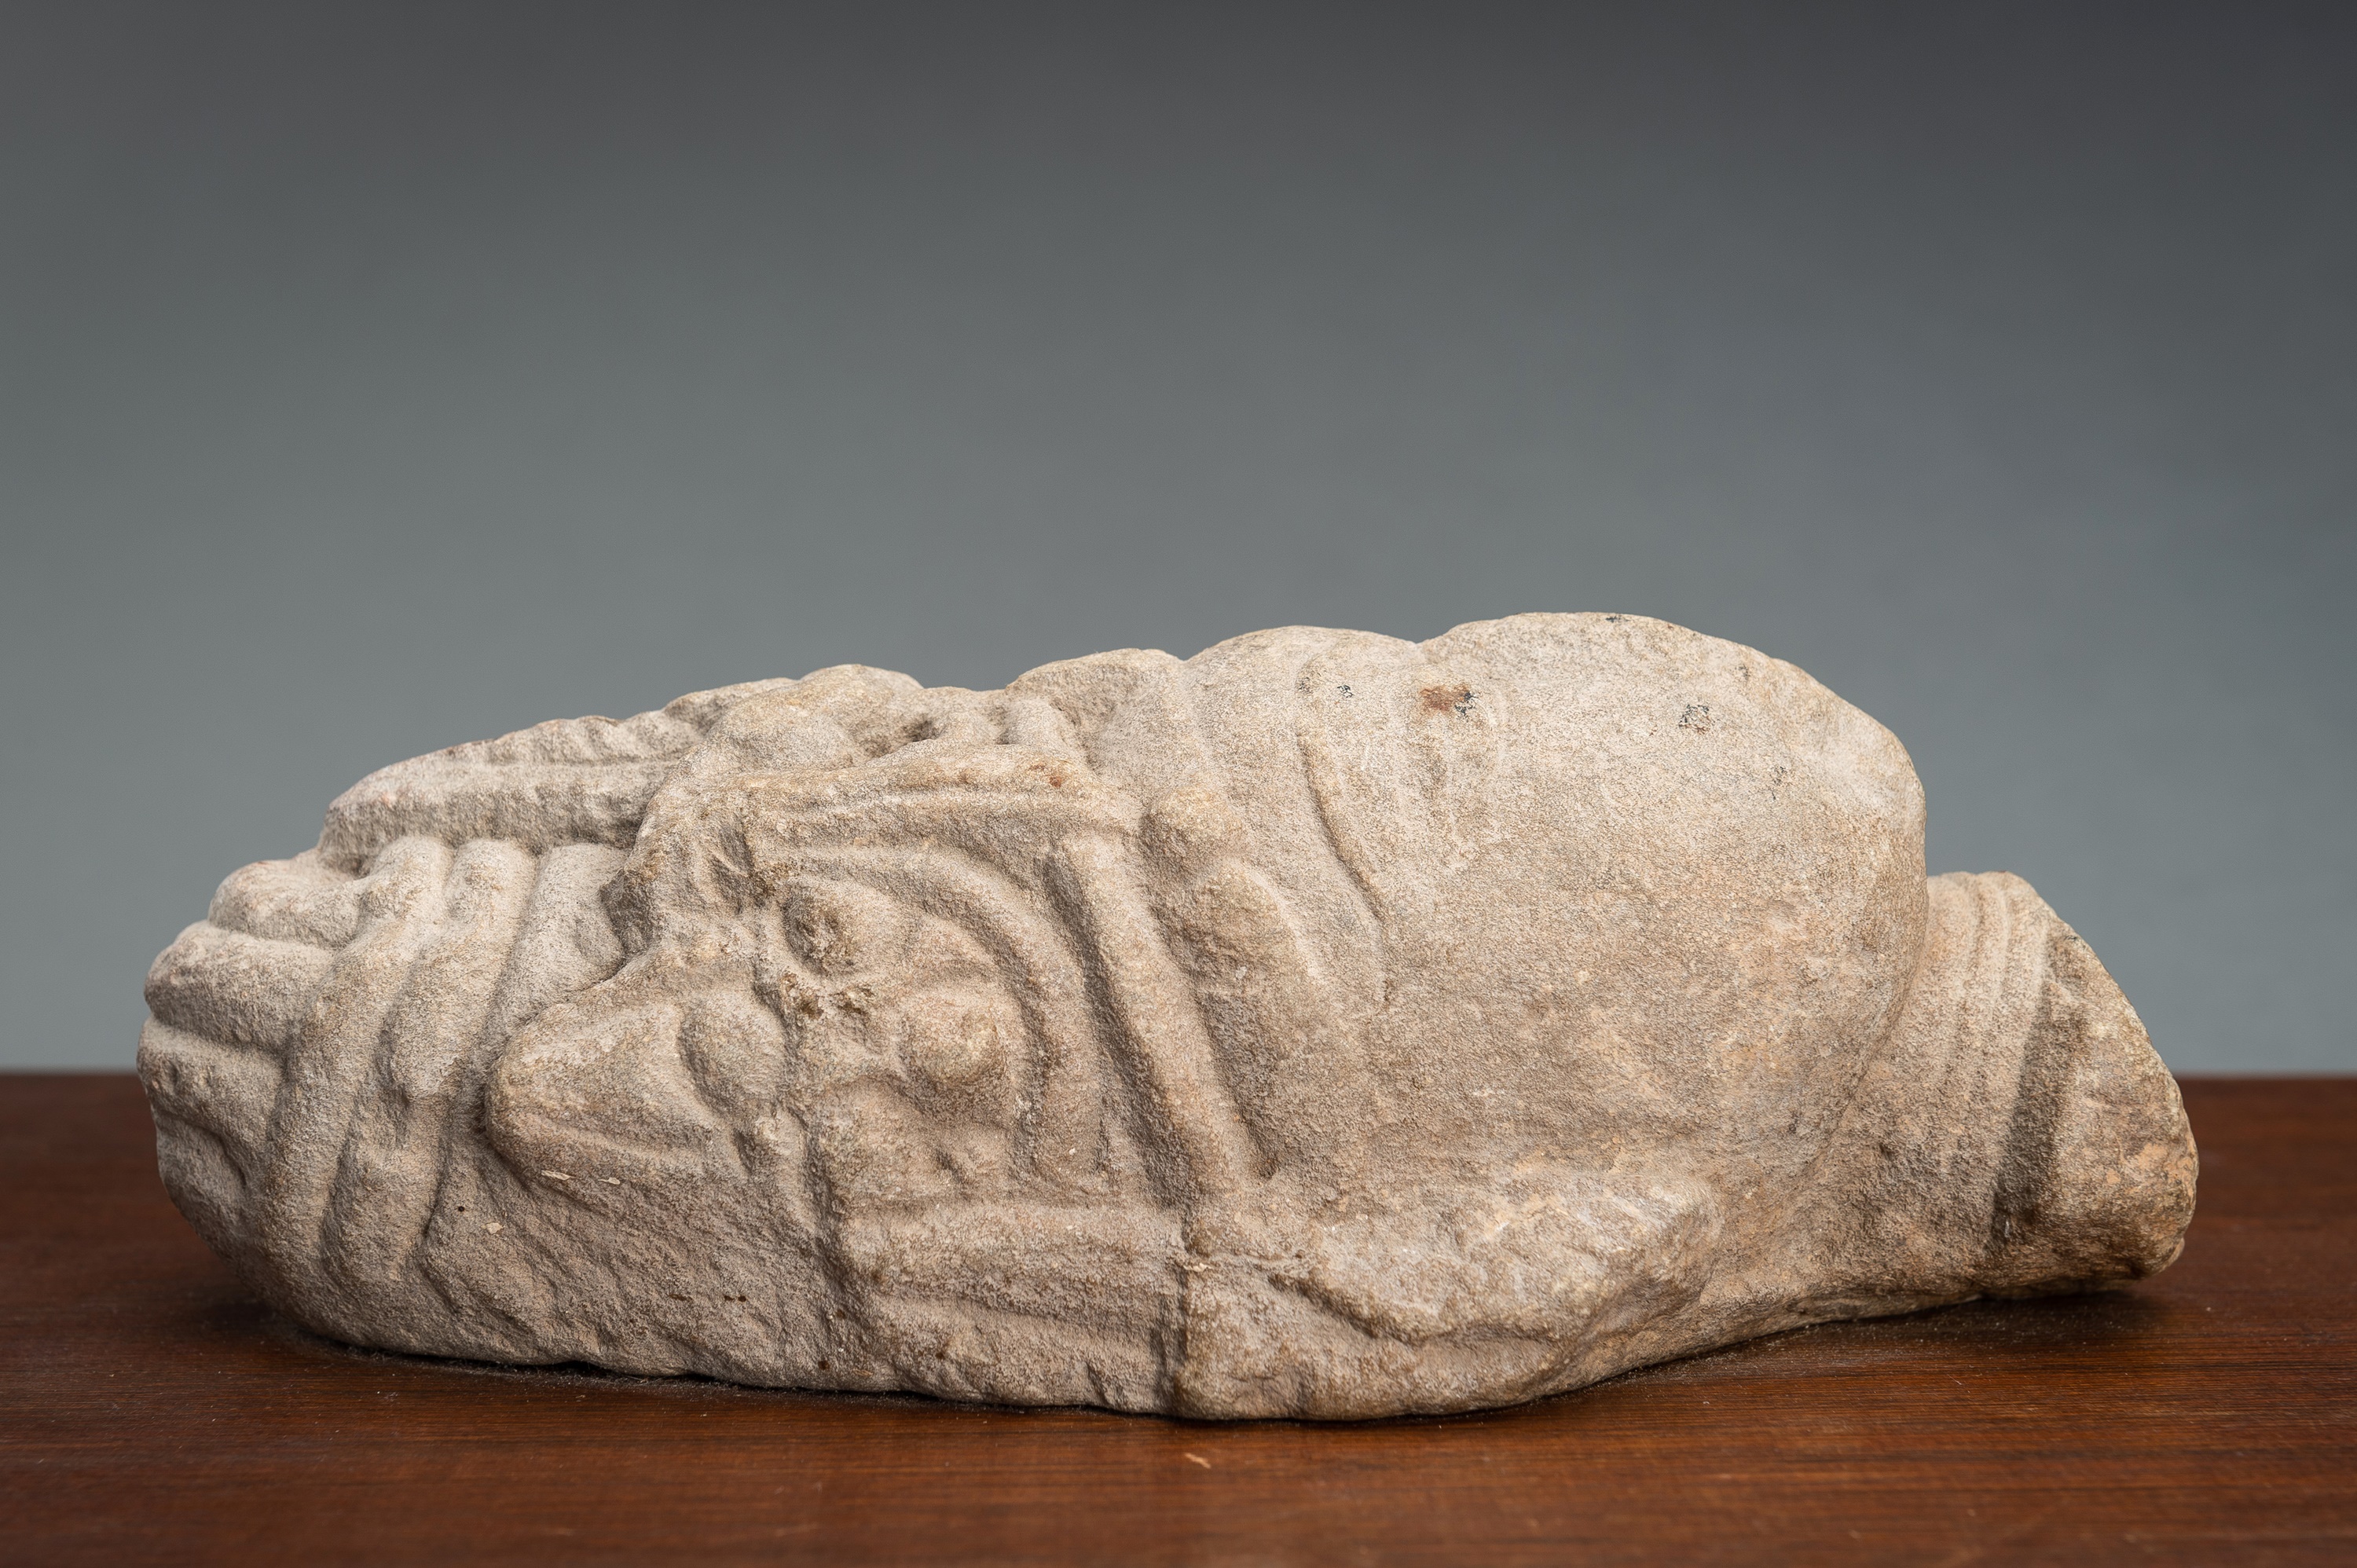 A SANDSTONE HEAD OF VISHNU WITH A MITER CROWN - Image 9 of 14